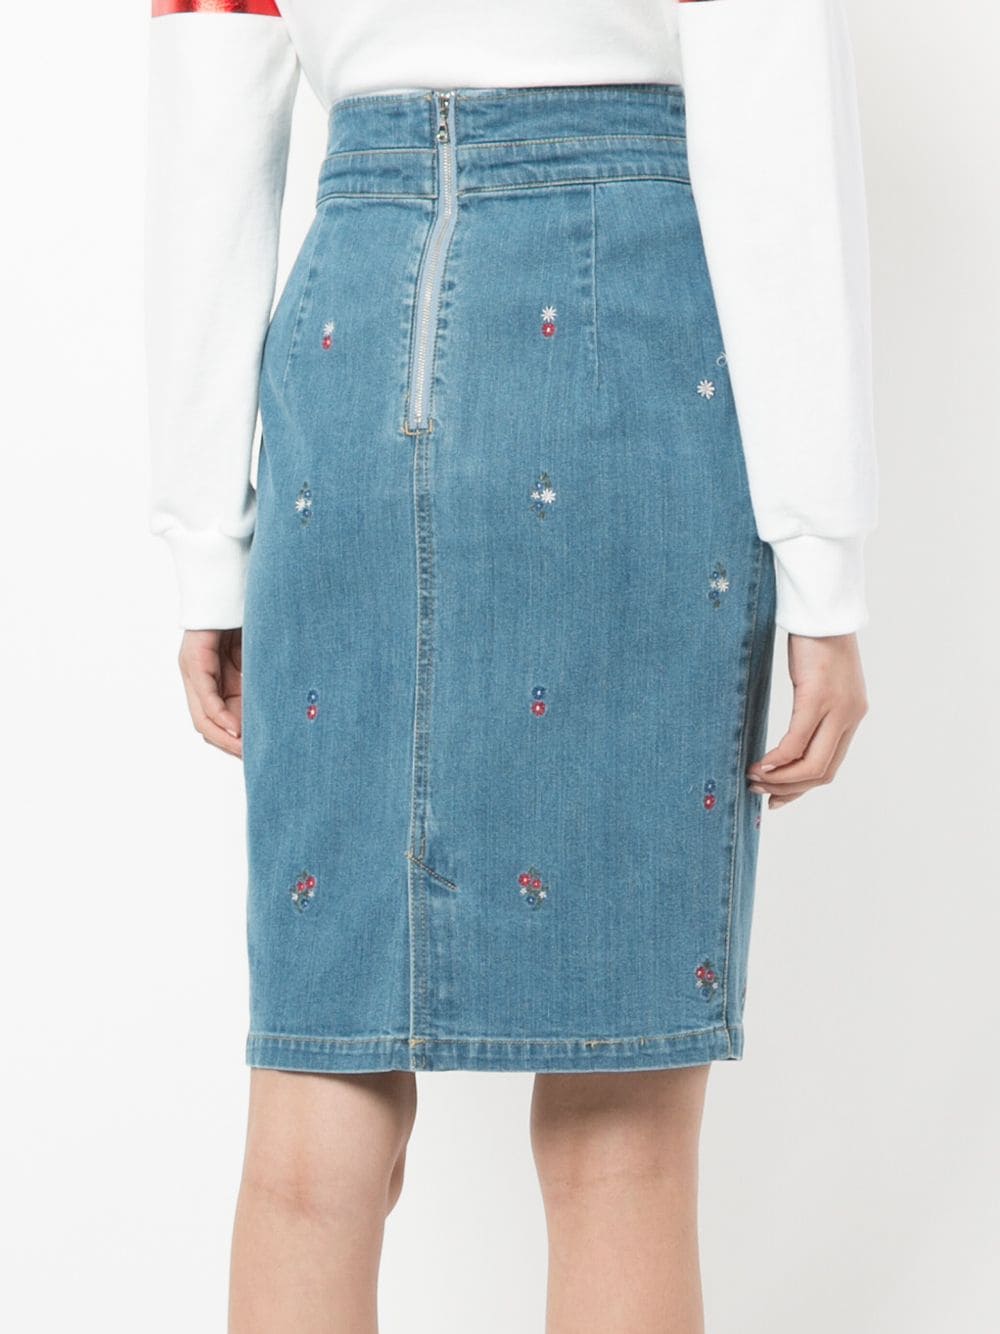 11 Cute Jean Skirt Outfits - Denim Skirt Outfit Ideas for Teens